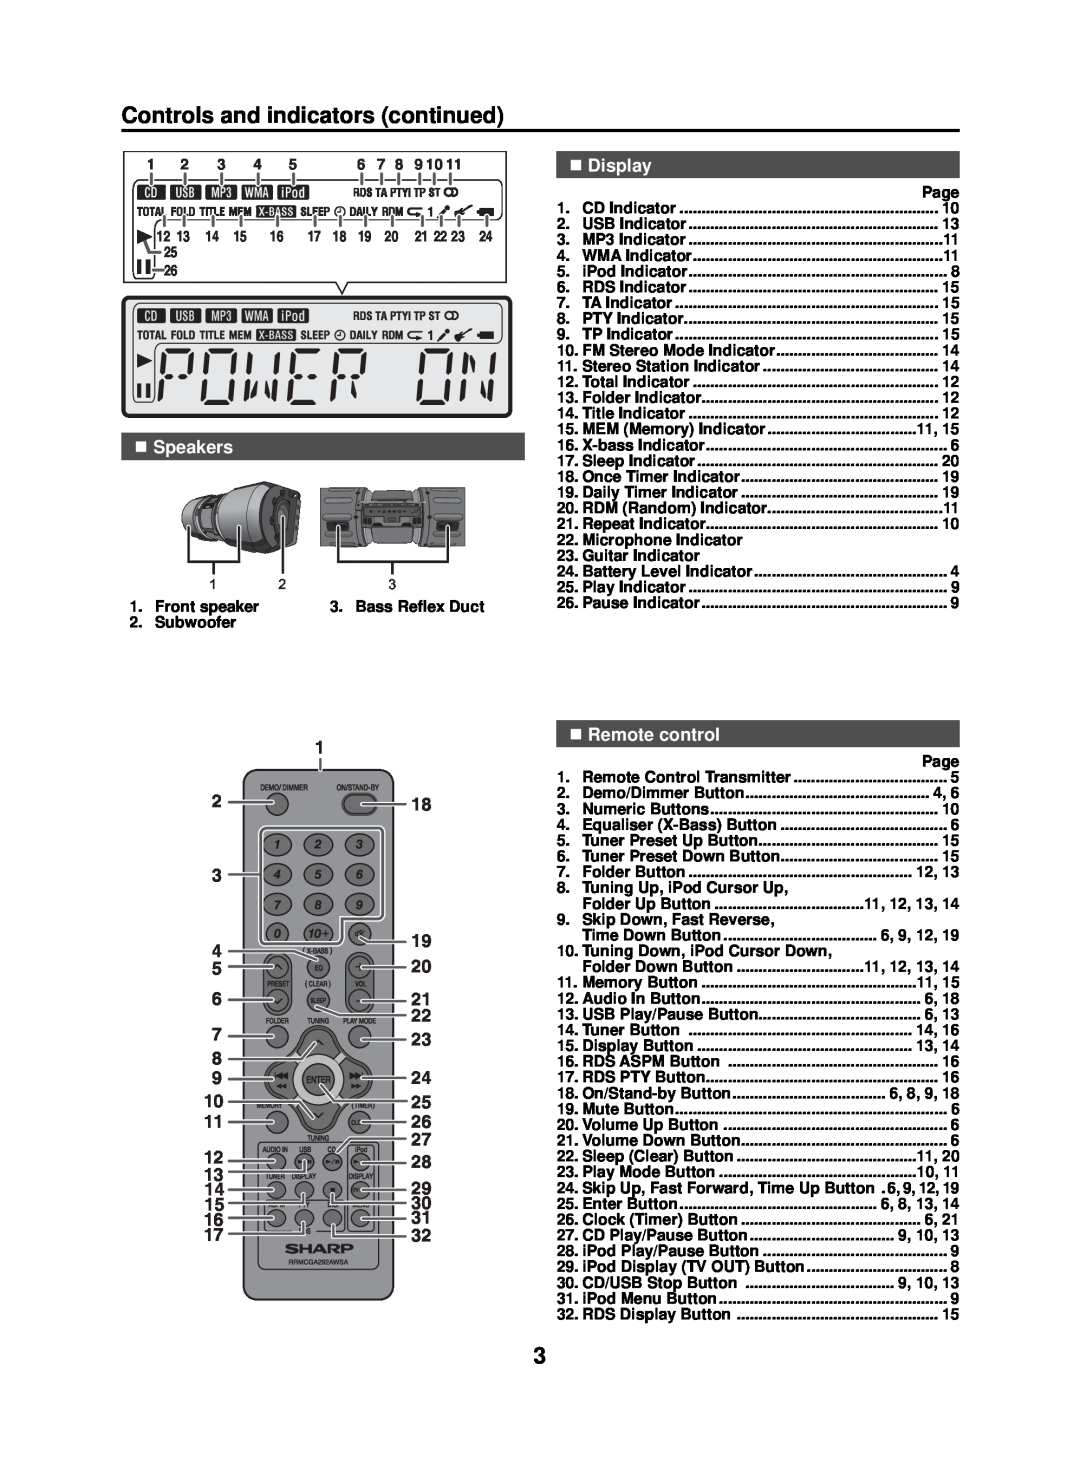 Sharp GX-M10H(OR), GX-M10H(RD) Controls and indicators continued, „ Display, 2 3 4 5 6 7 8 9 10 11 12, „ Remote control 